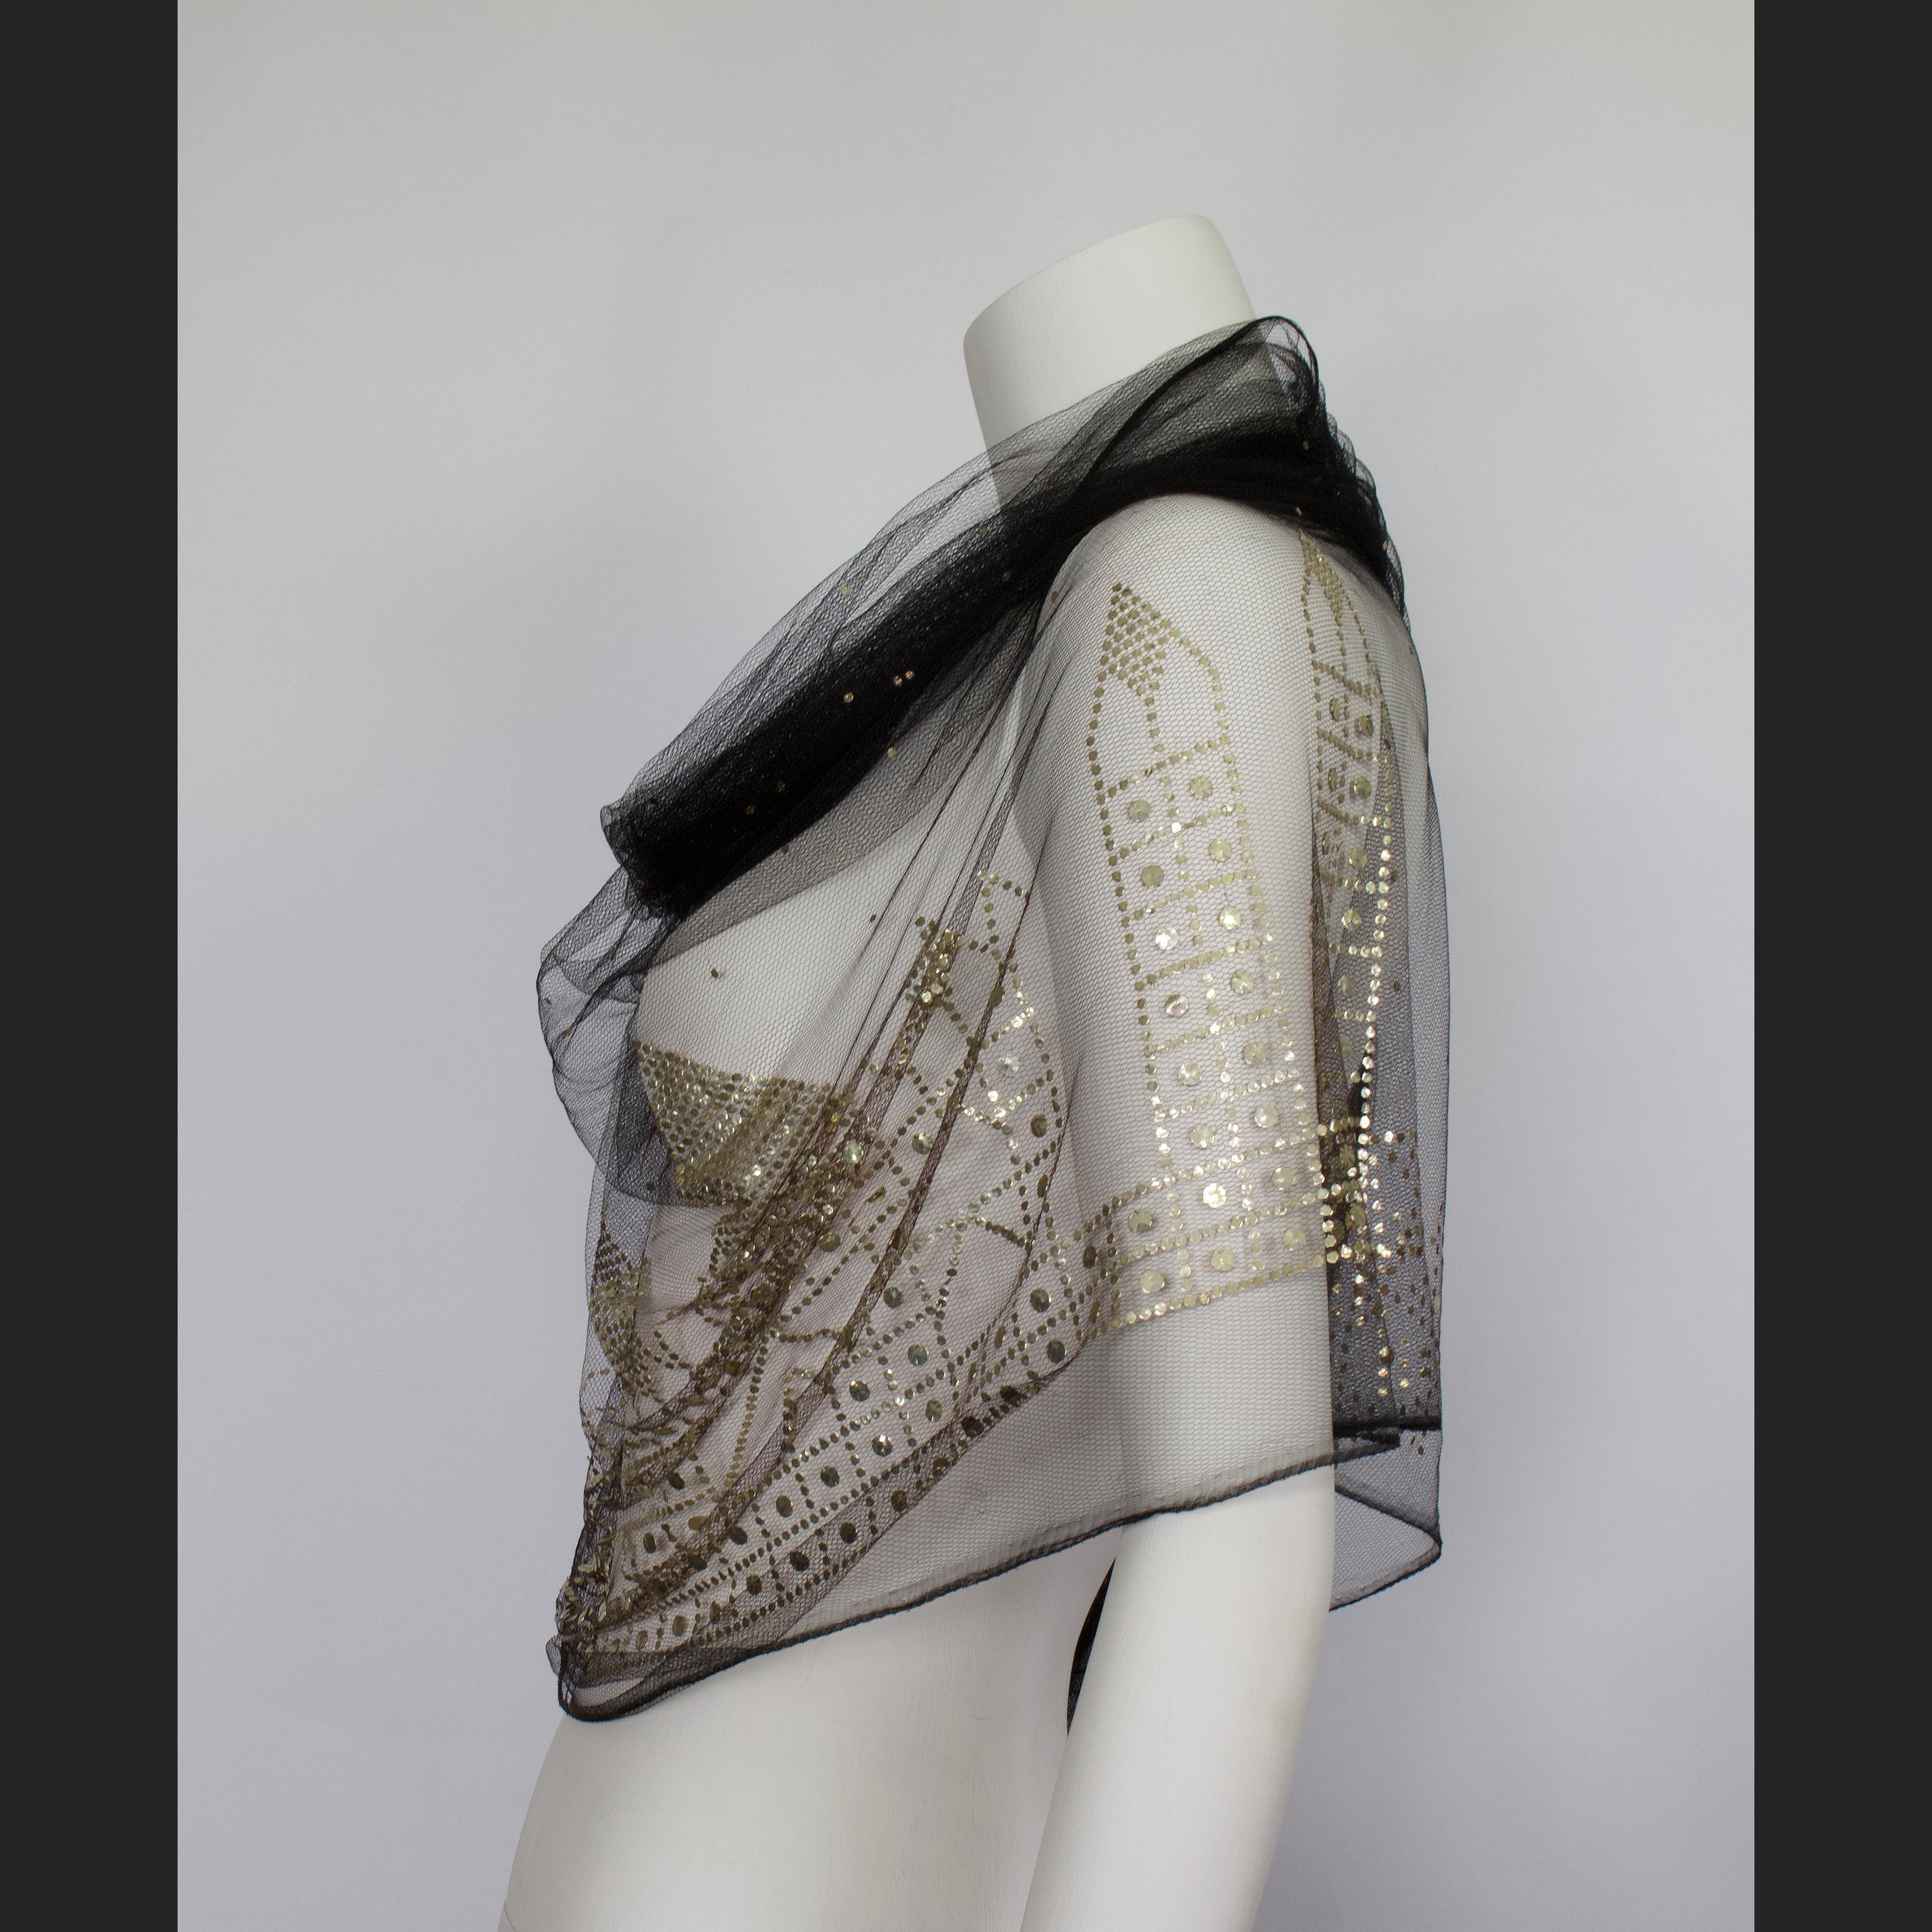 Product Details: Fine Silver Metal Sequin - Soft Mesh Tulle Net Wrap Scarf / Shawl - Raw Edge Hemline - RARE - Intricate Fine Silver Sequin Detailing Throughout - NEW
Label: Unknown
Materials: Fine Silver Sequin - Soft Mesh Tulle Net / Black
Scarf